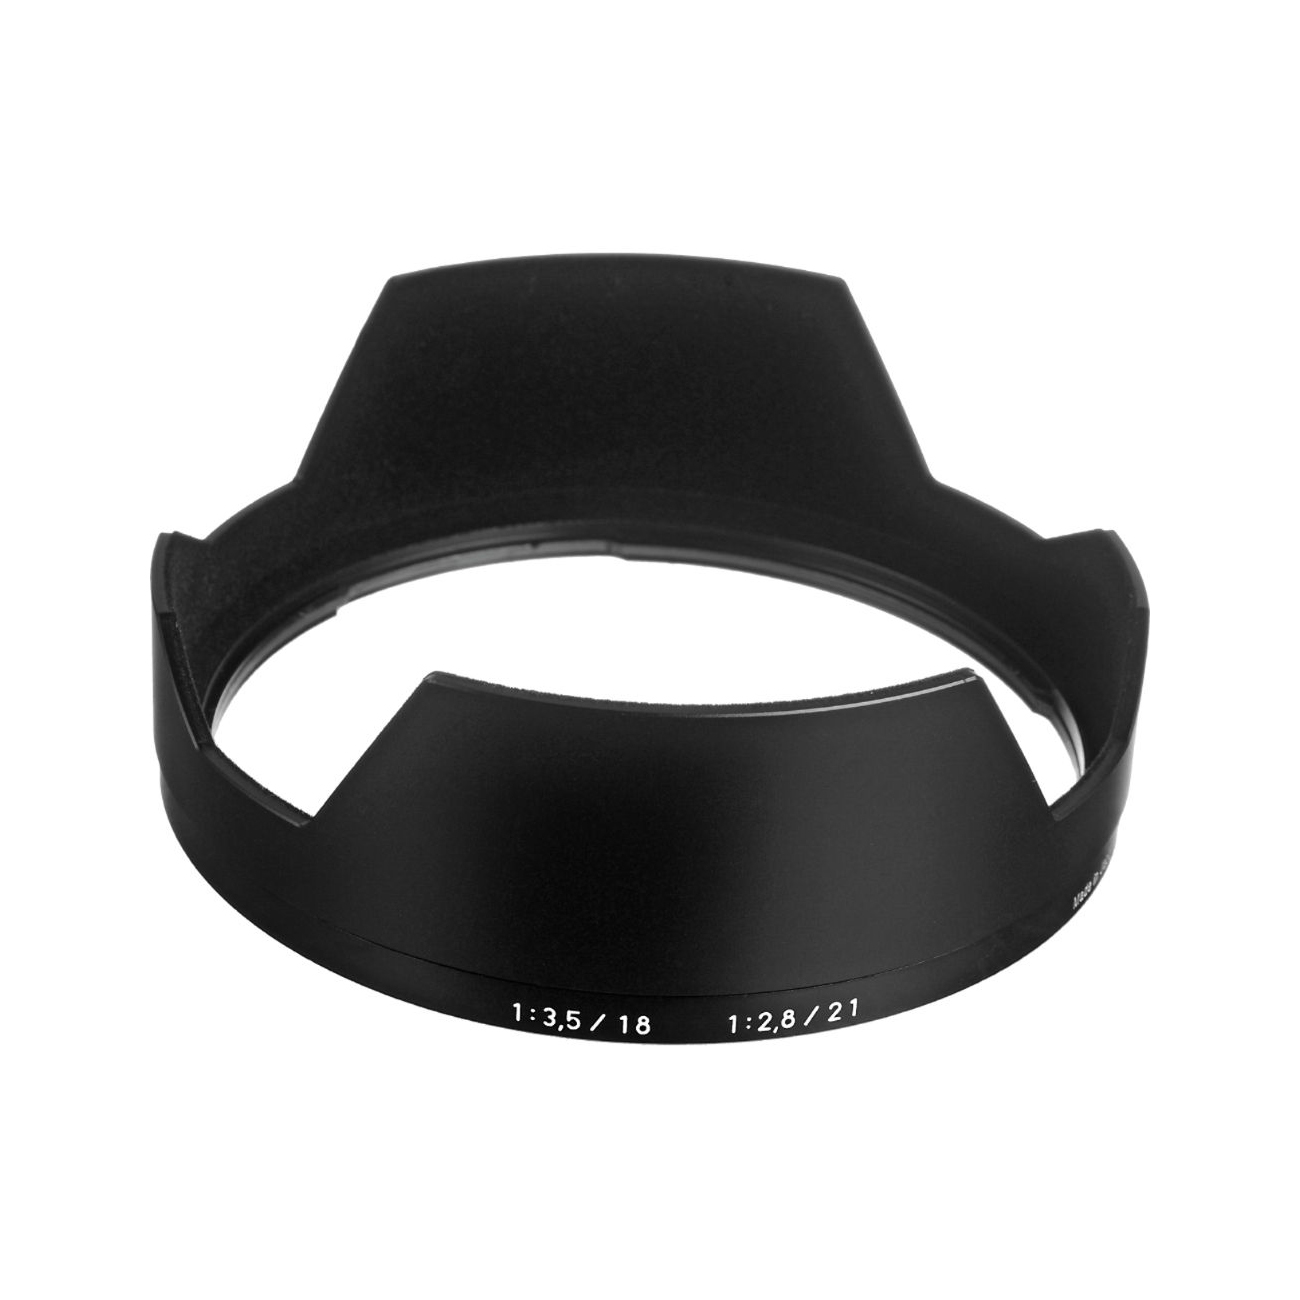 Zeiss Lens Hood Distagon T* 18mm f/3,5 Solblender for Classic f/3.5